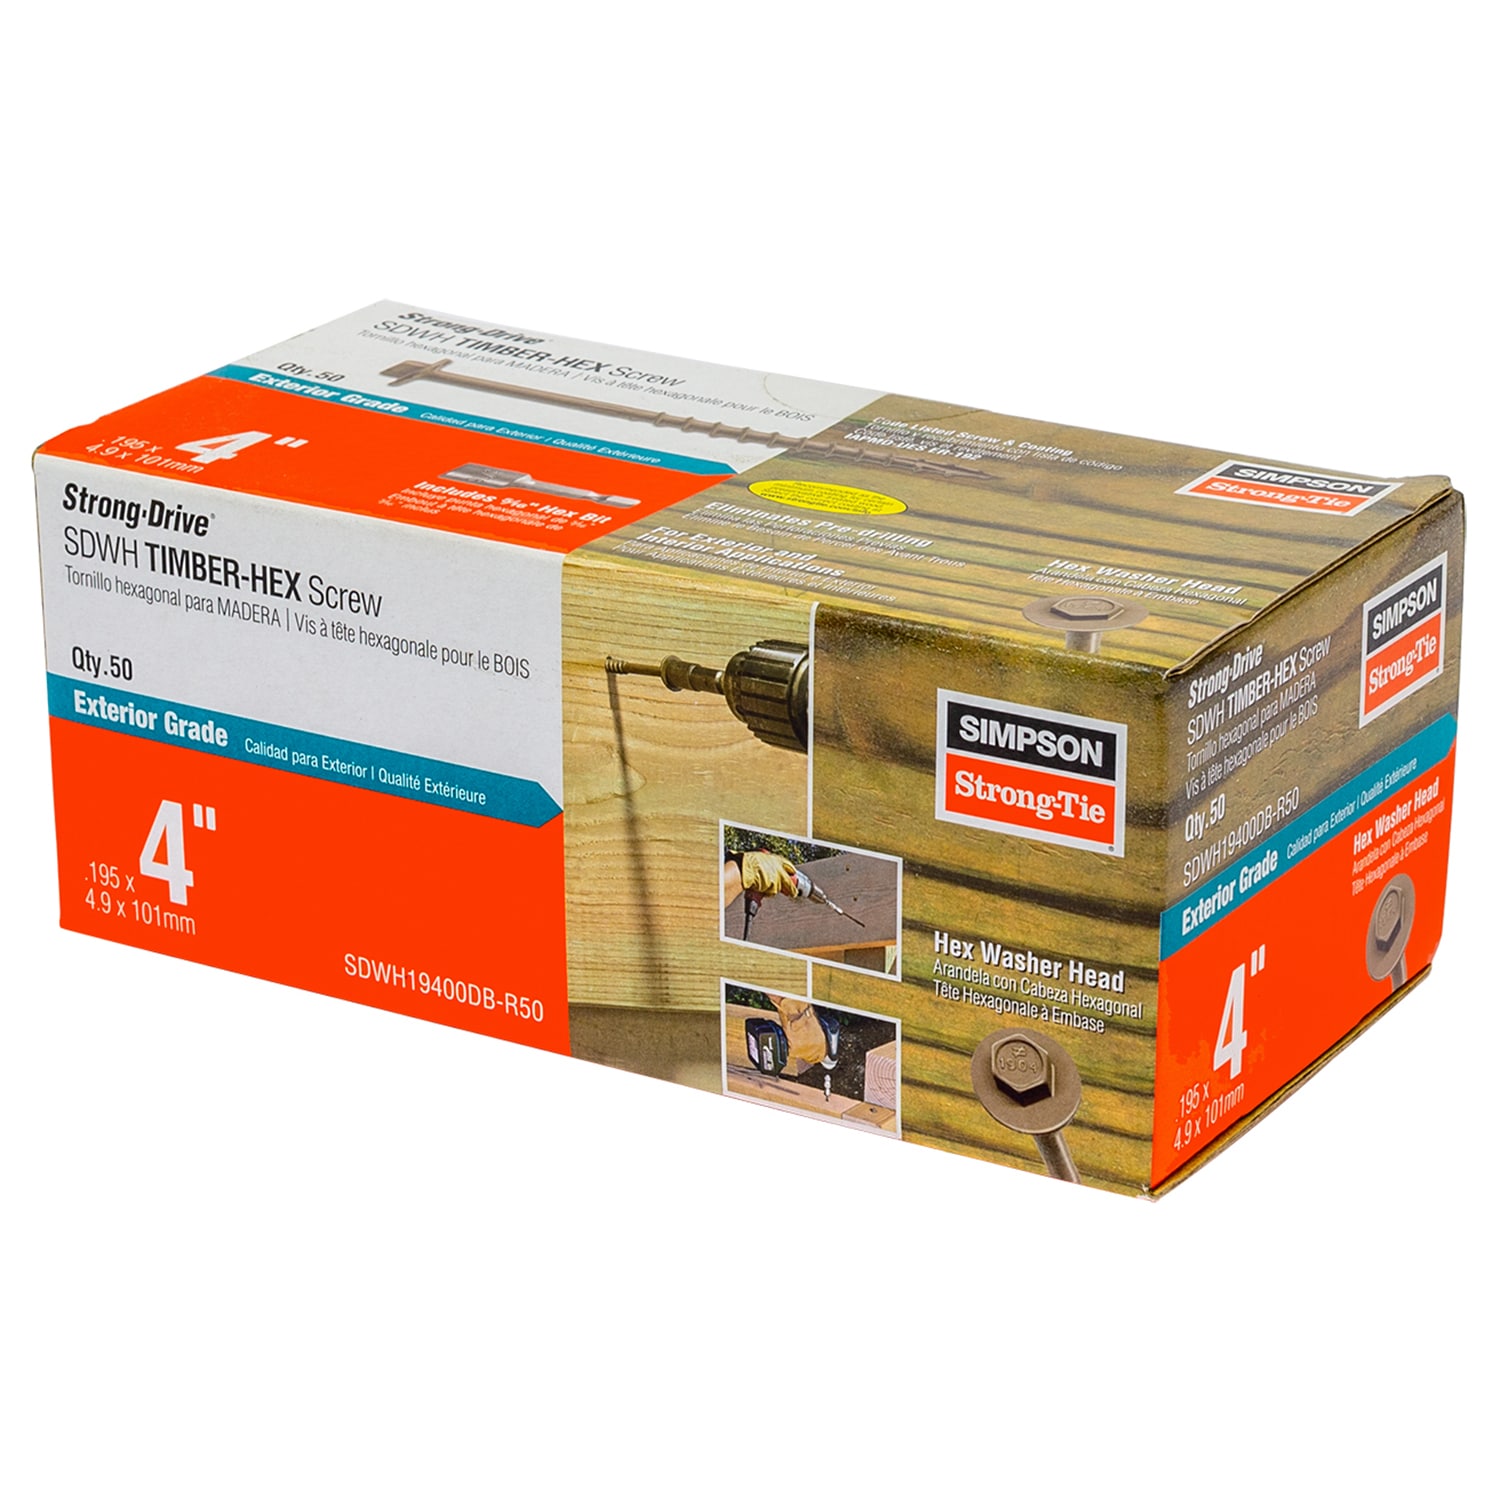 Simpson Strong-Tie 5/16-in x 3-in Double-barrier Strong-Drive SDWH  Timber-Hex Exterior Wood Screws (50-Per Box) in the Wood Screws department  at